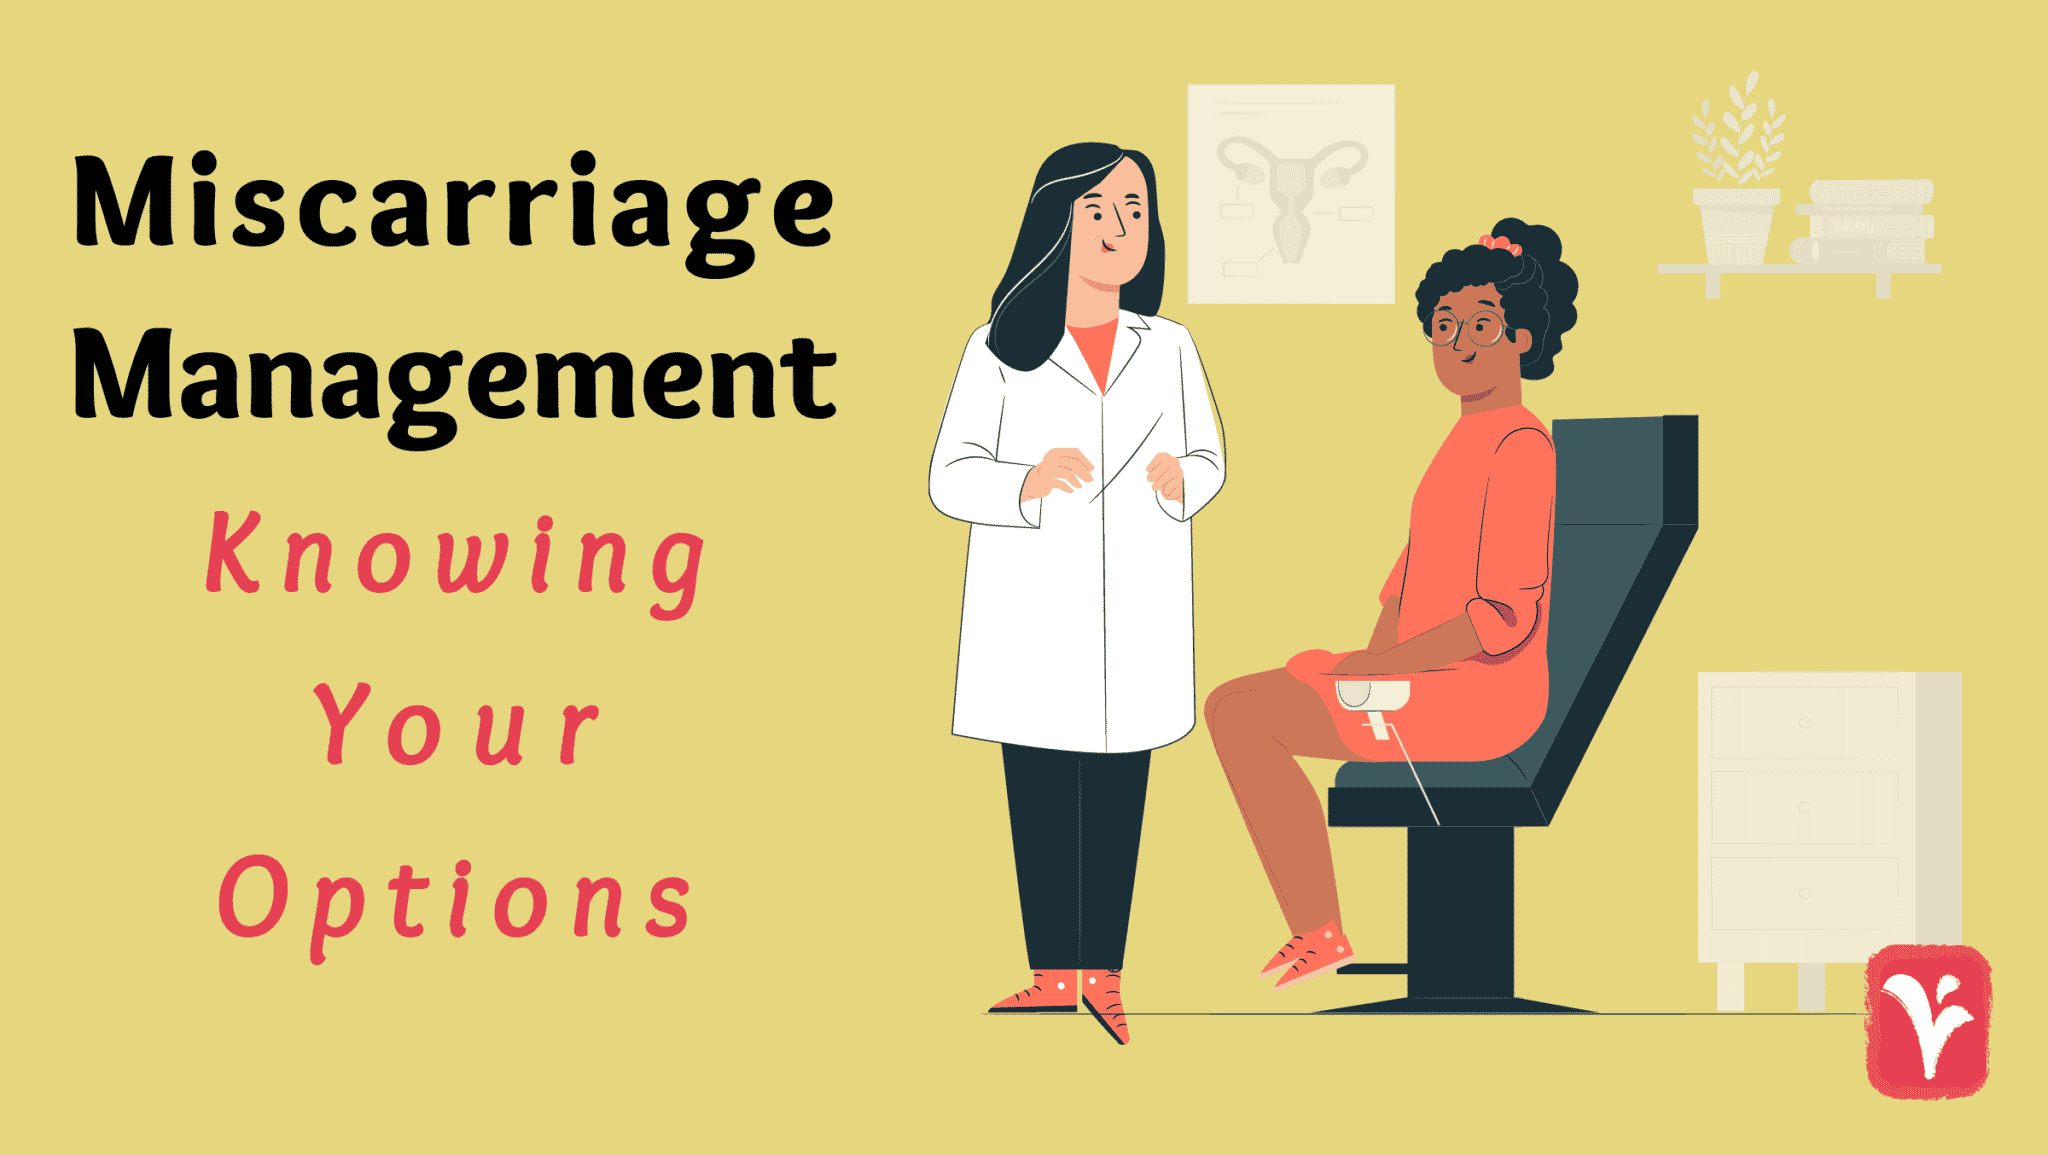 Miscarriage Management